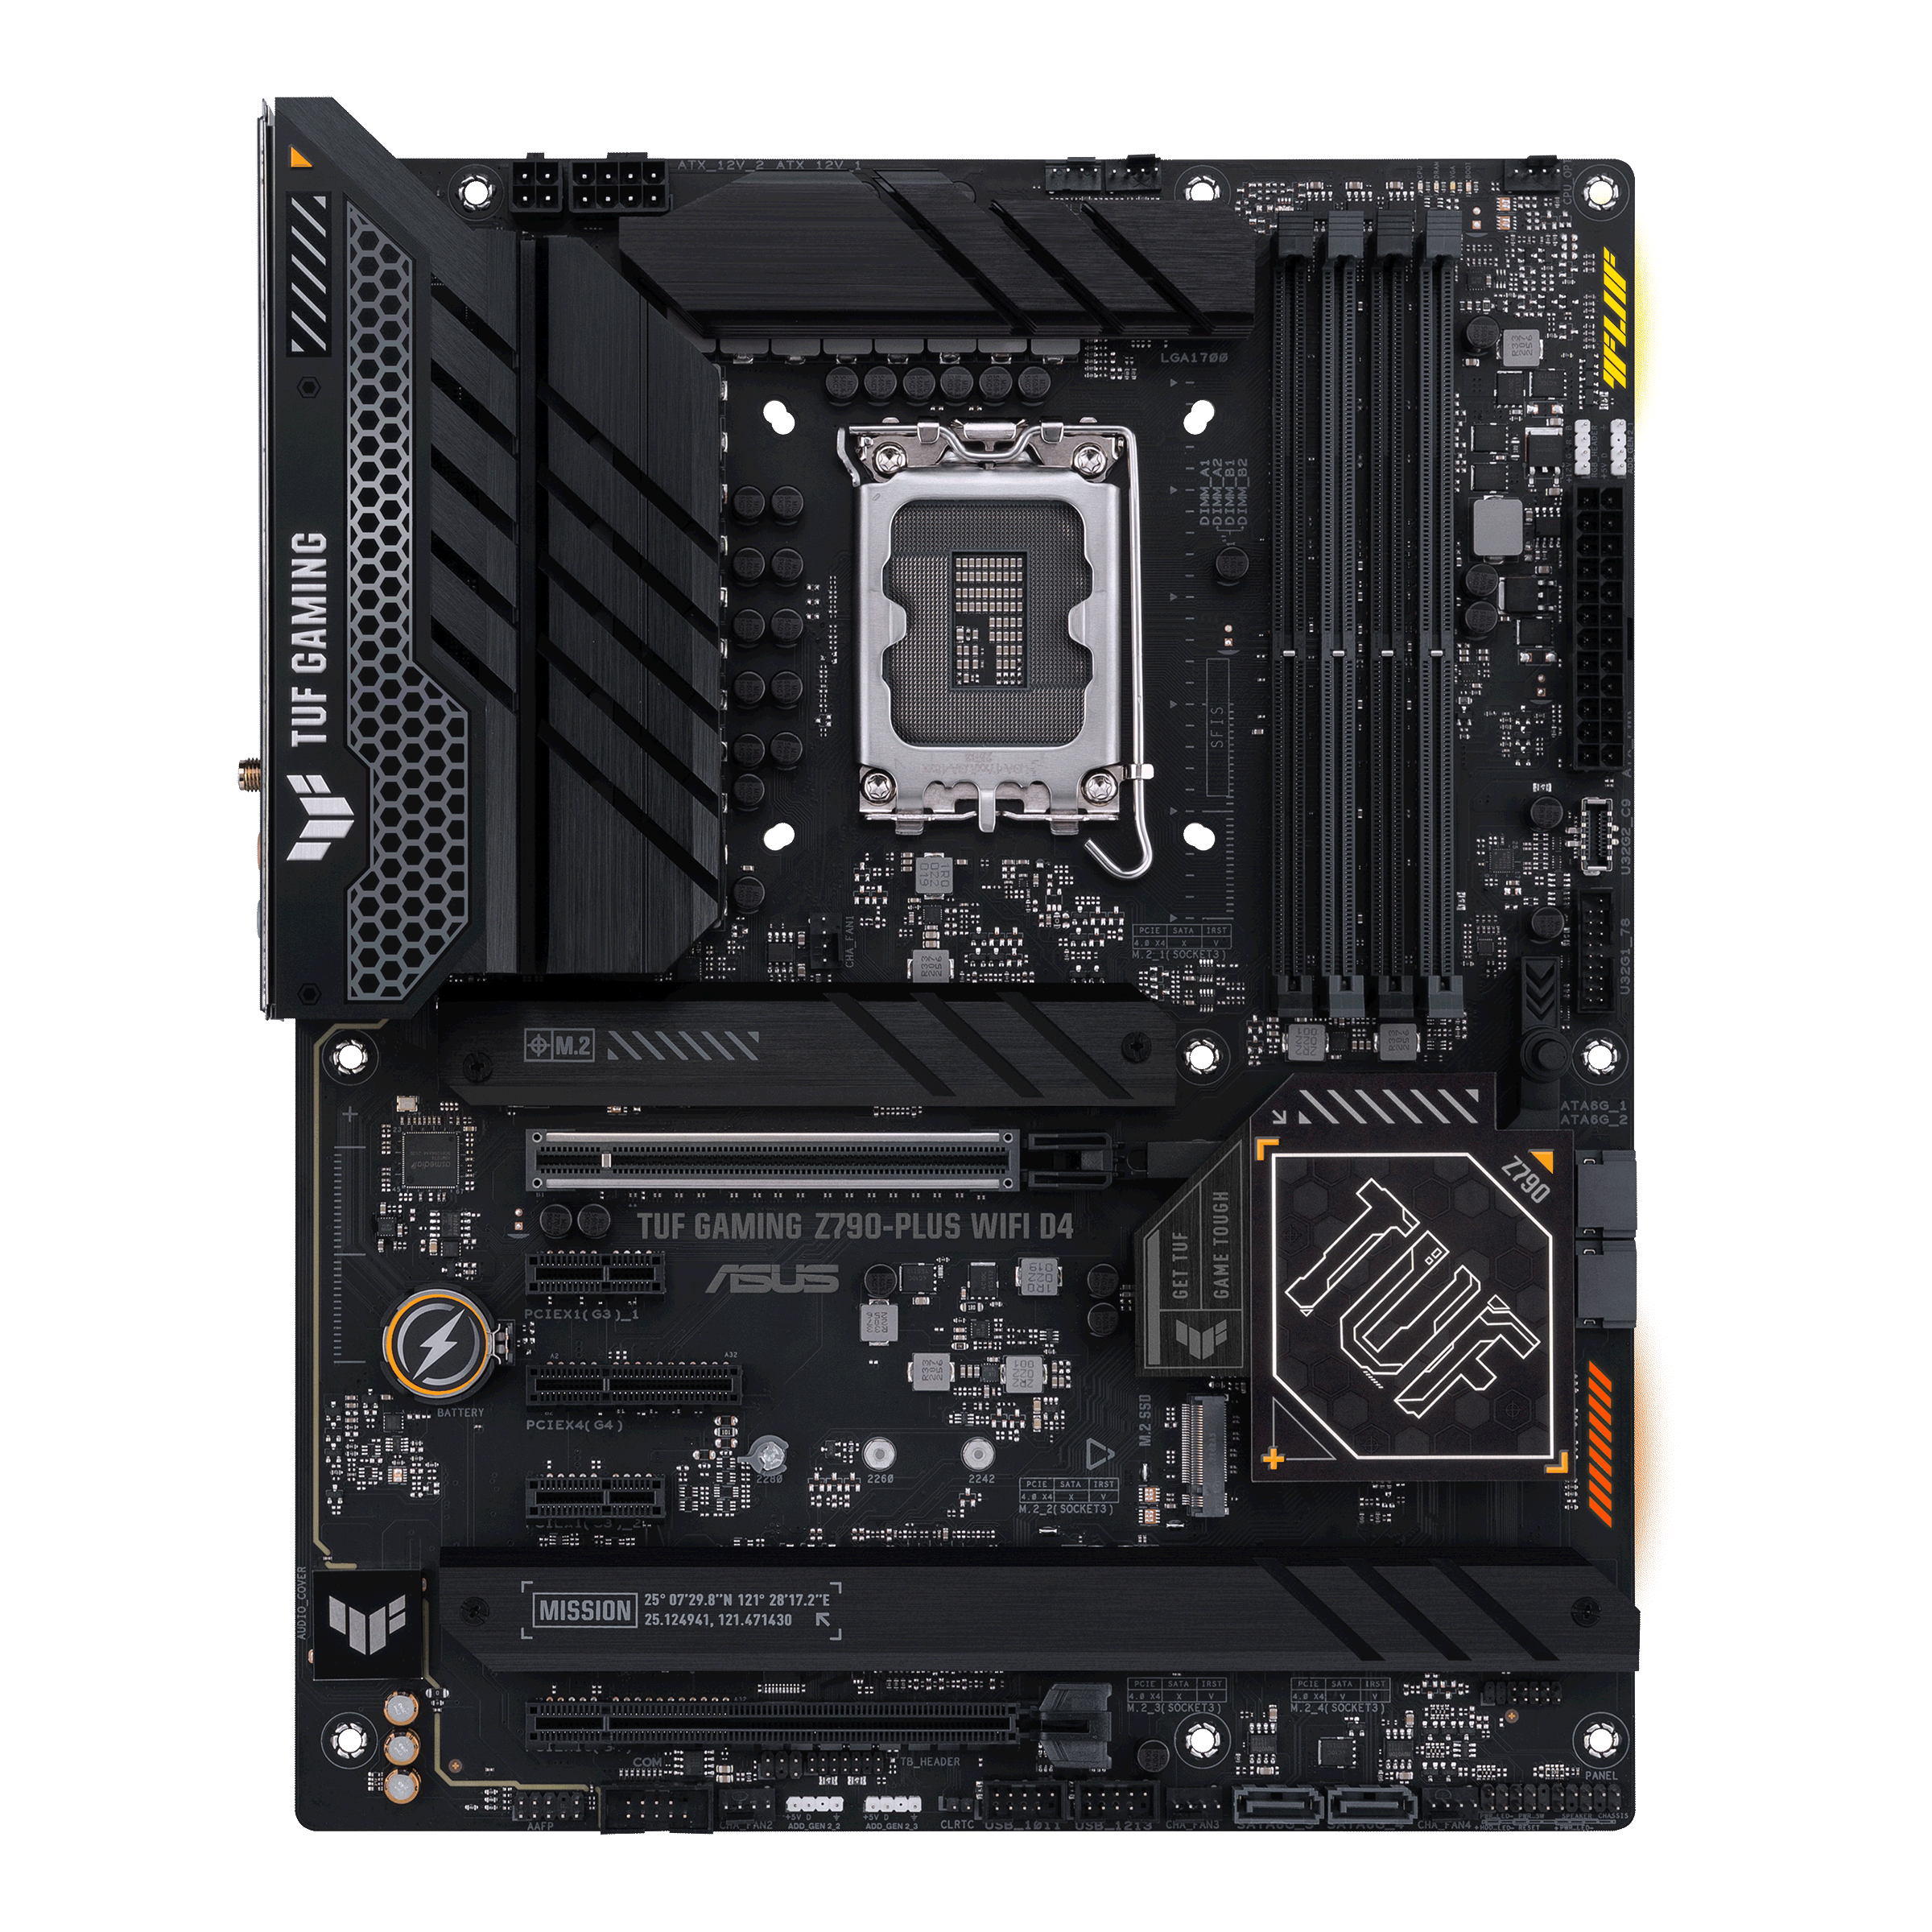 TUF GAMING Z790-PLUS WIFI D4｜Motherboards｜ASUS Canada